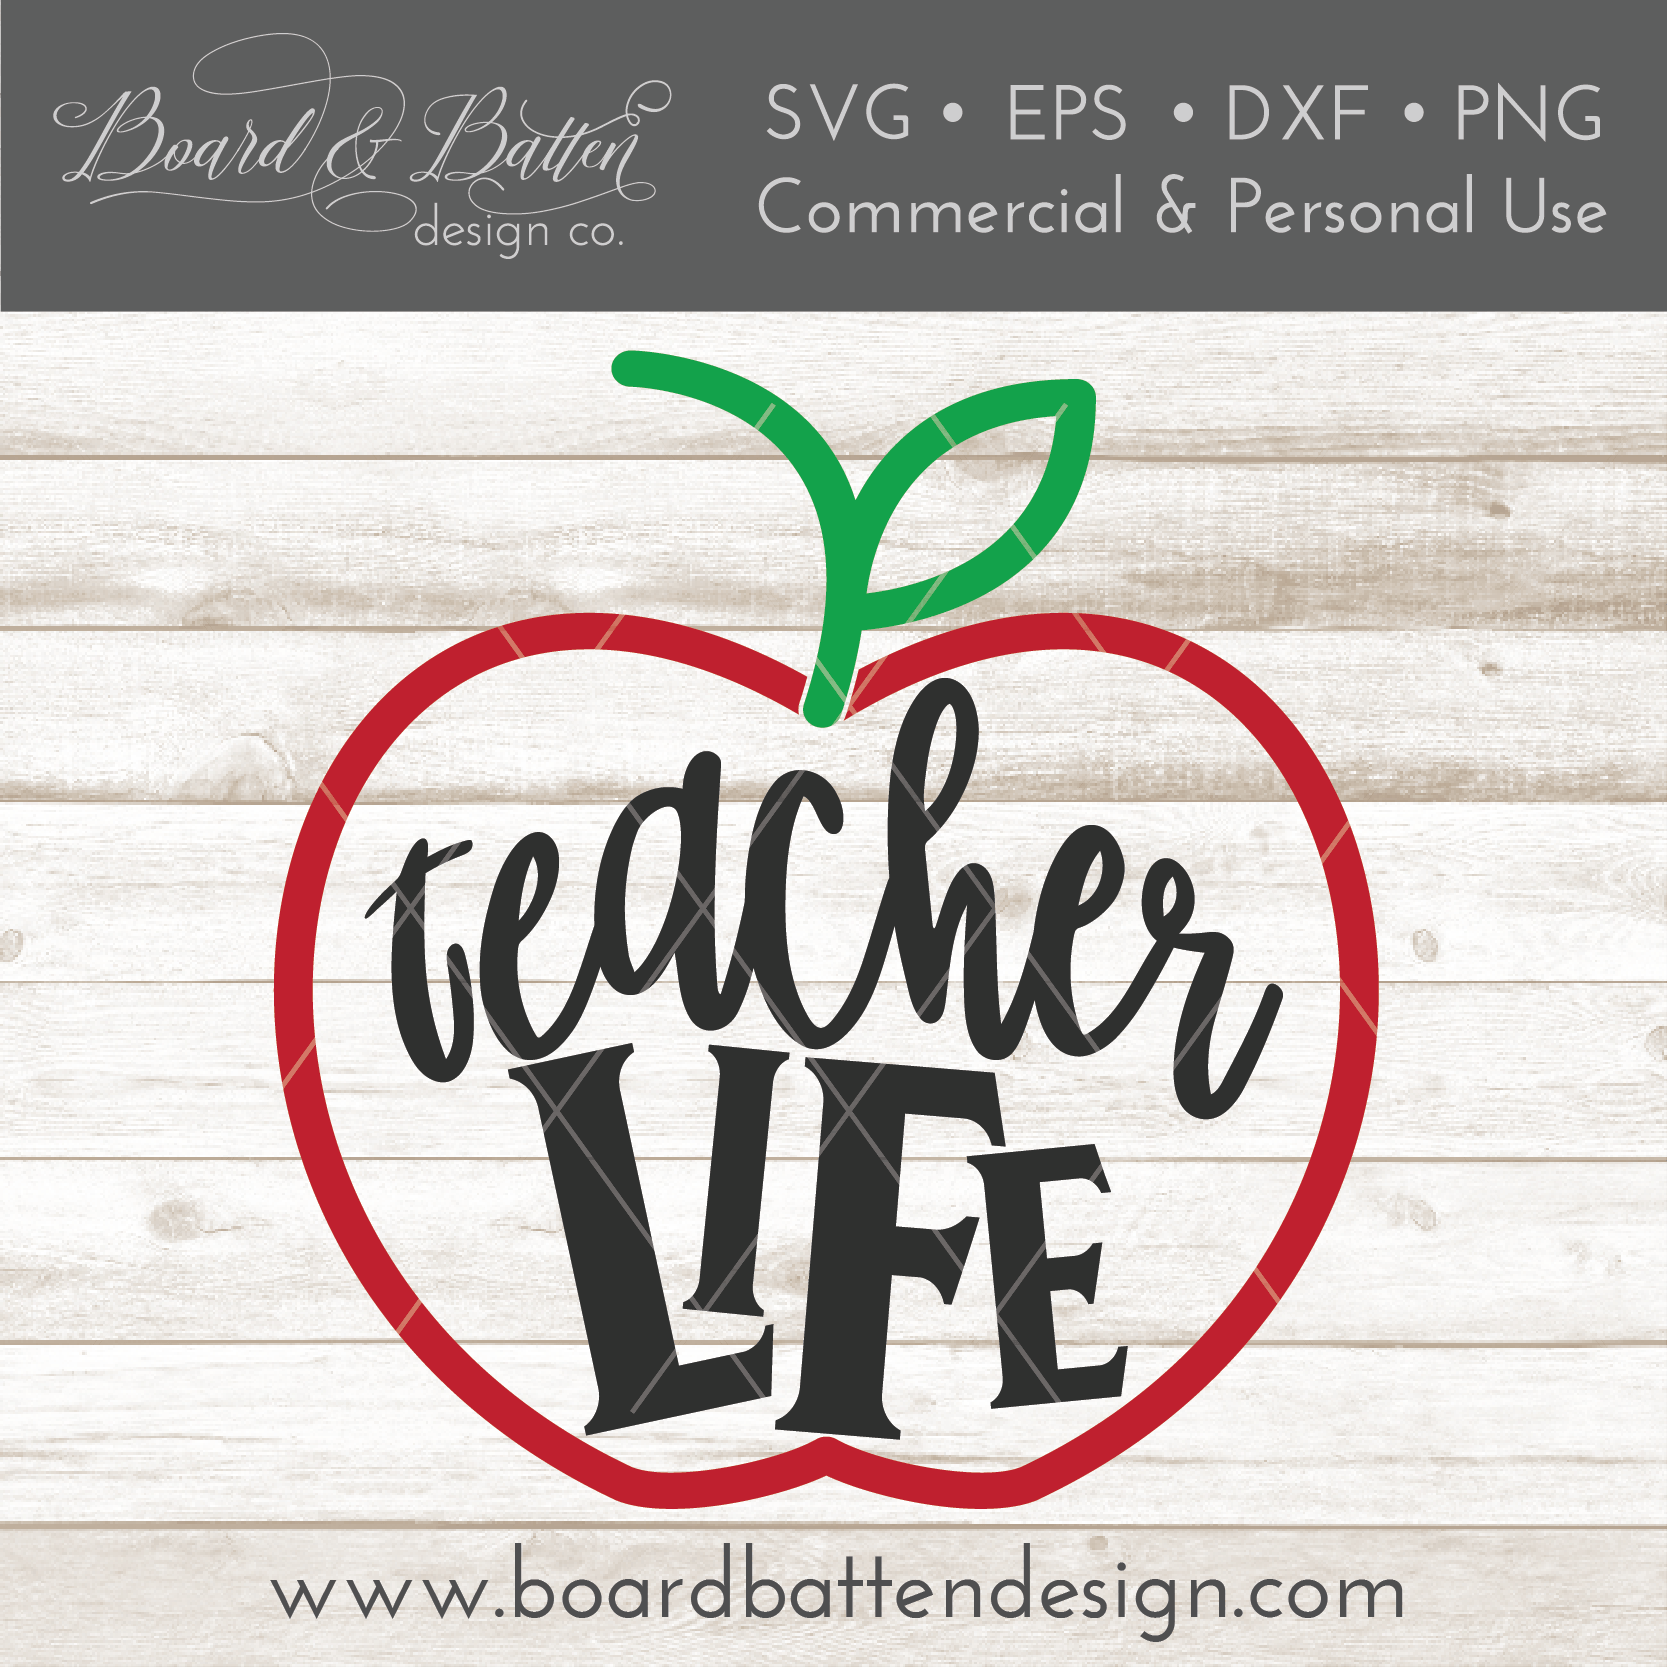 Teacher Life SVG File - Commercial Use SVG Files for Cricut & Silhouette